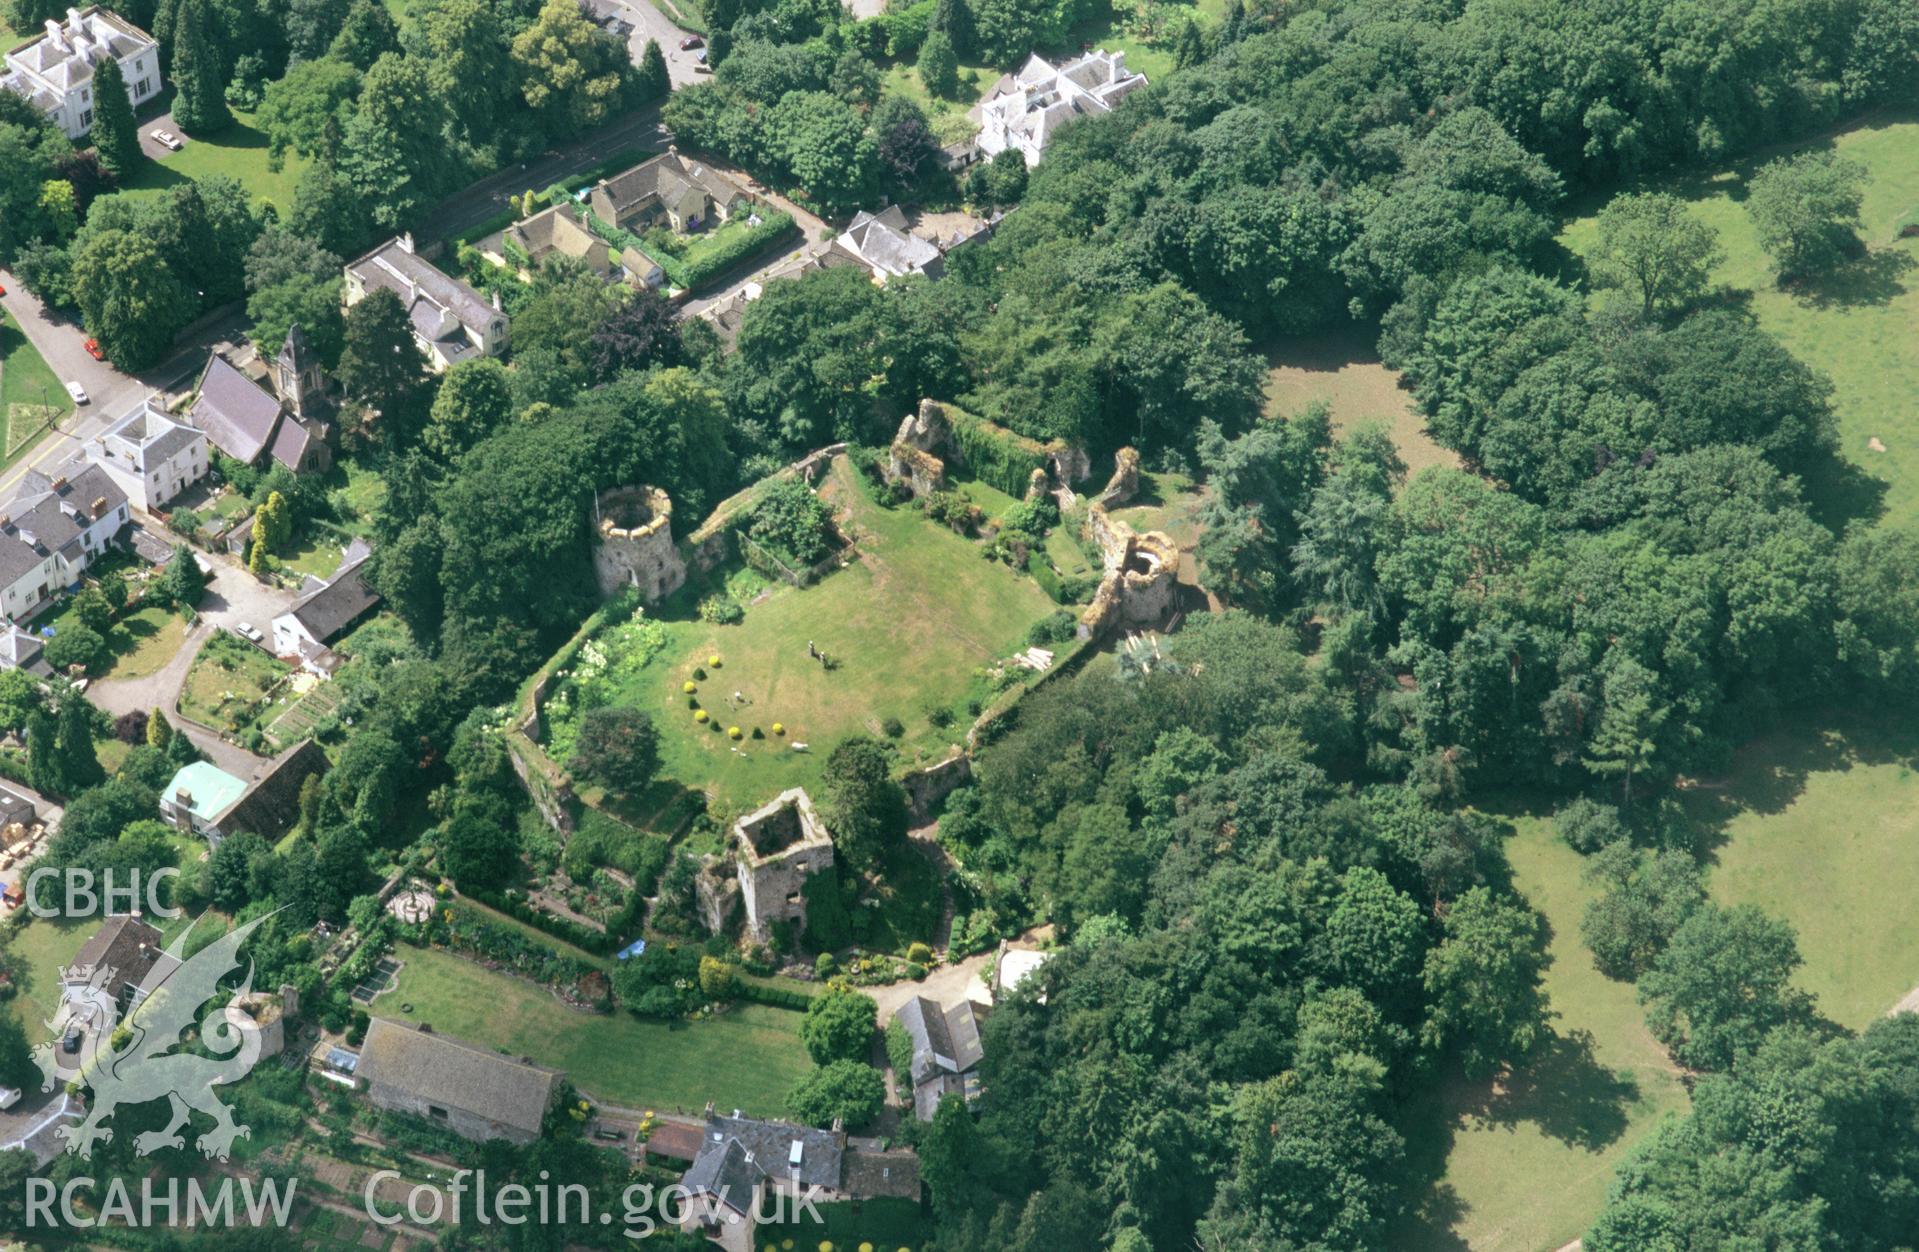 RCAHMW colour slide oblique aerial photograph of the castle, Usk, taken by C.R.Musson on the 11/07/1996